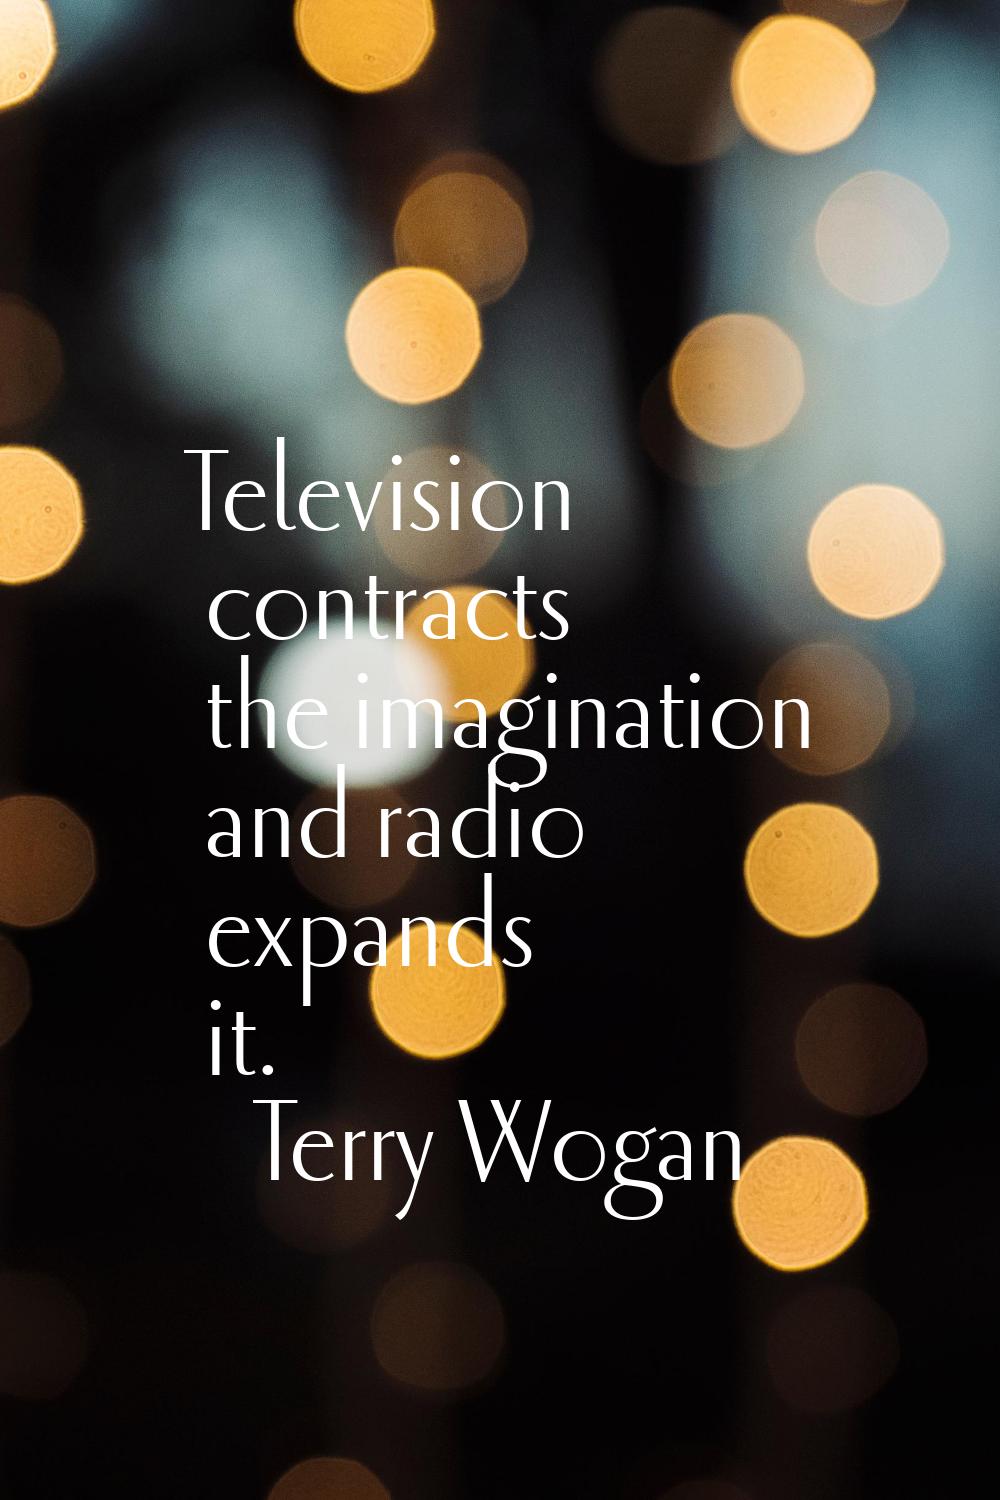 Television contracts the imagination and radio expands it.